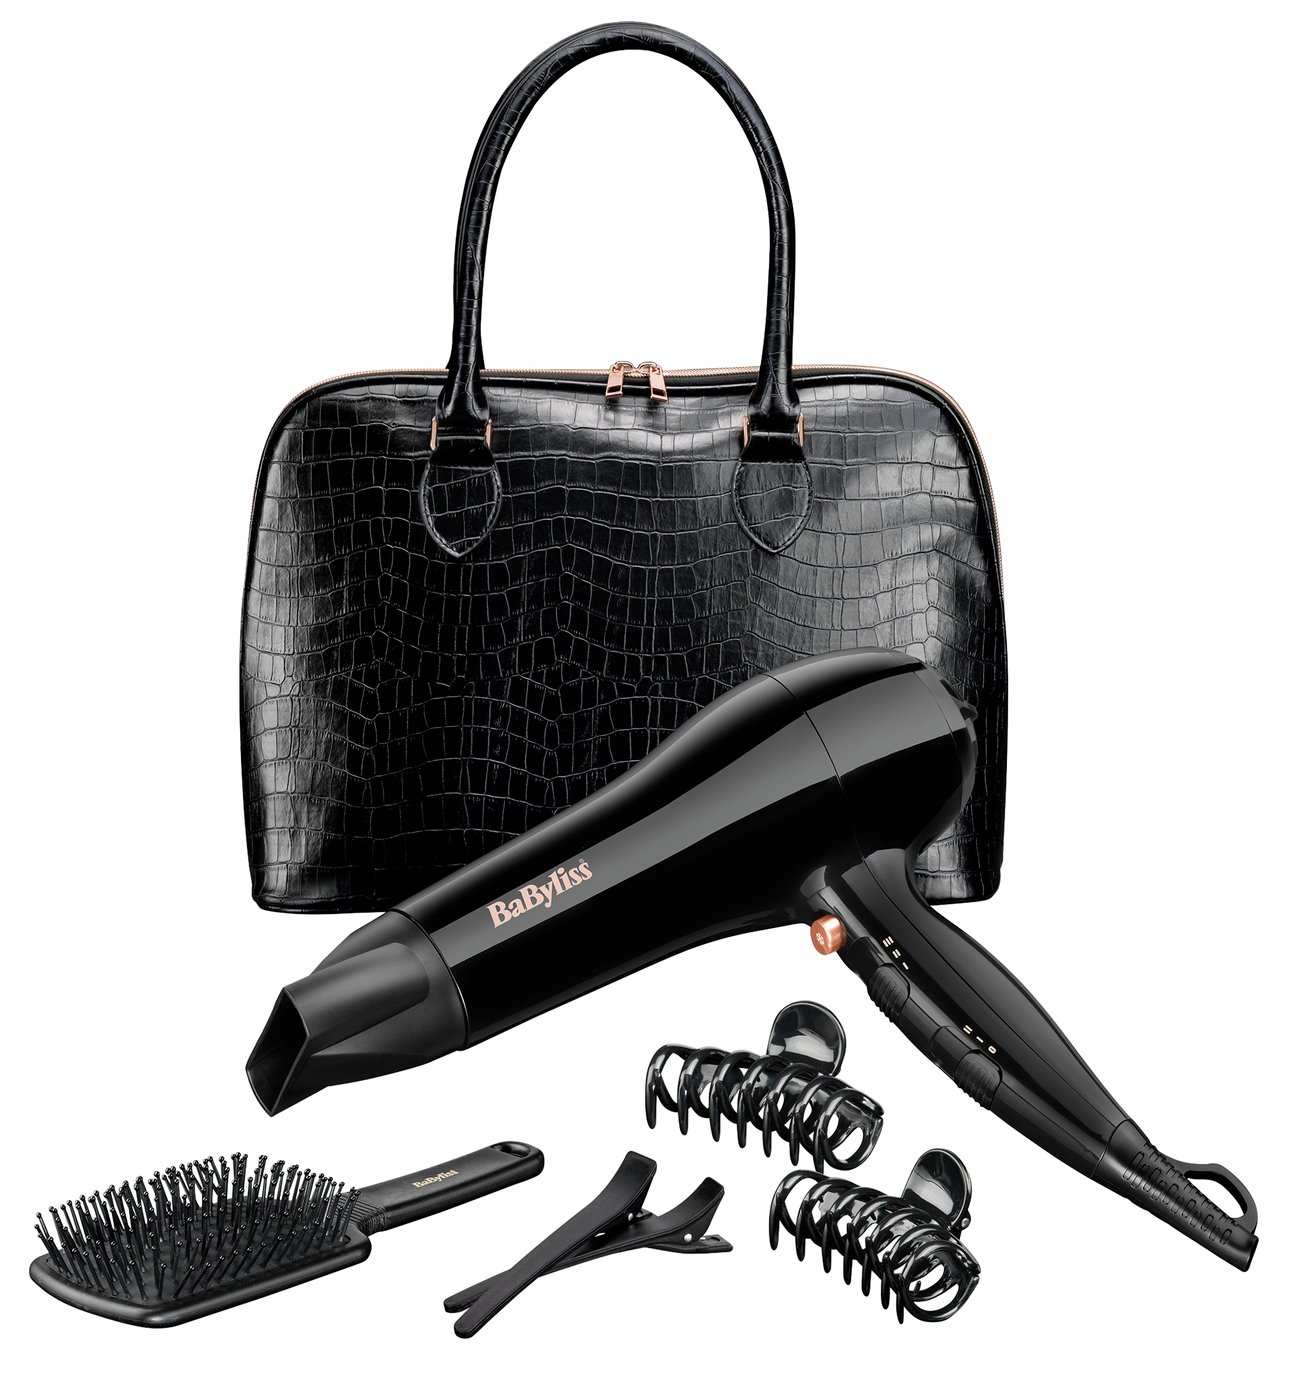 BaByliss Styling Collection Hair Dryer Gift Set